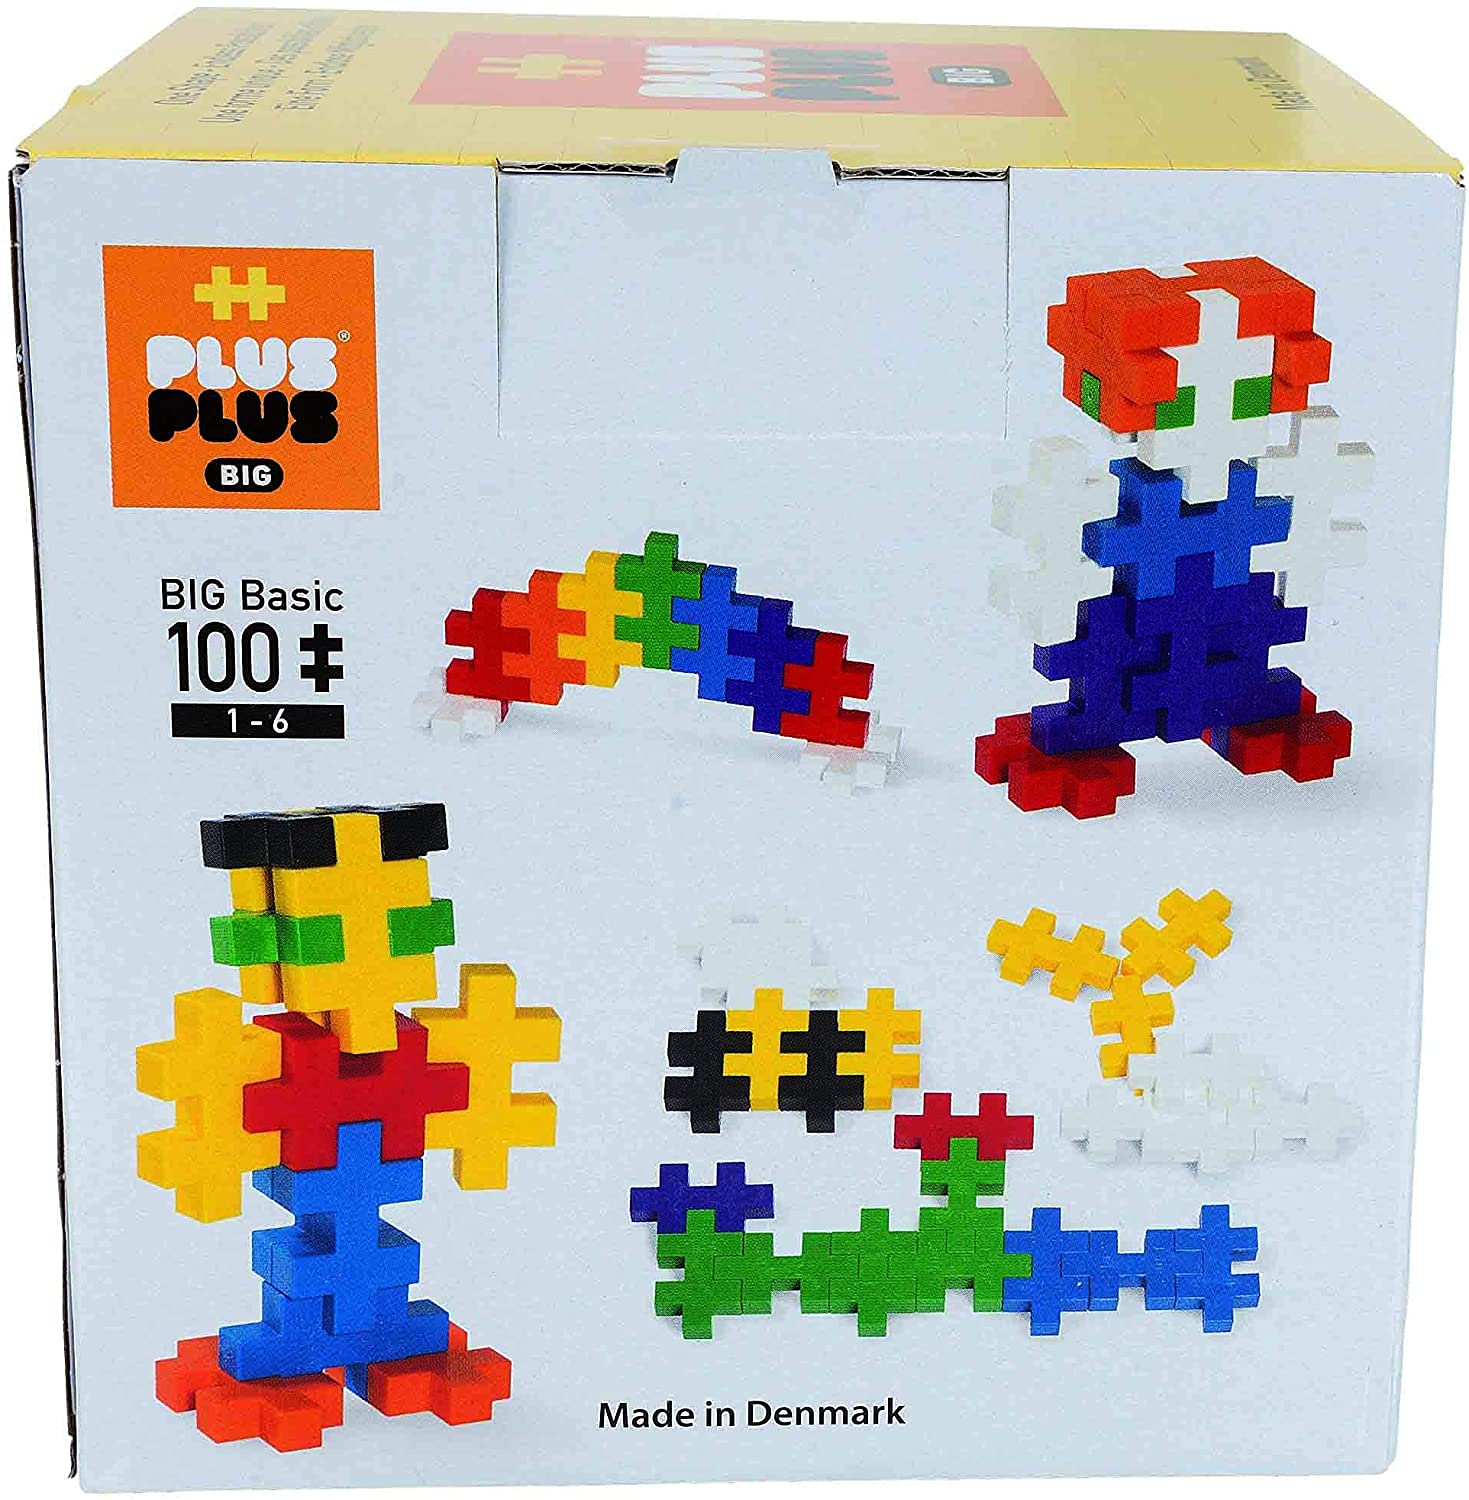 PLUS PLUS BIG - Open Play Set - 100 Piece - Basic Color Mix, Construction Building Stem Toy, Interlocking Large Puzzle Blocks for Toddlers and Preschool